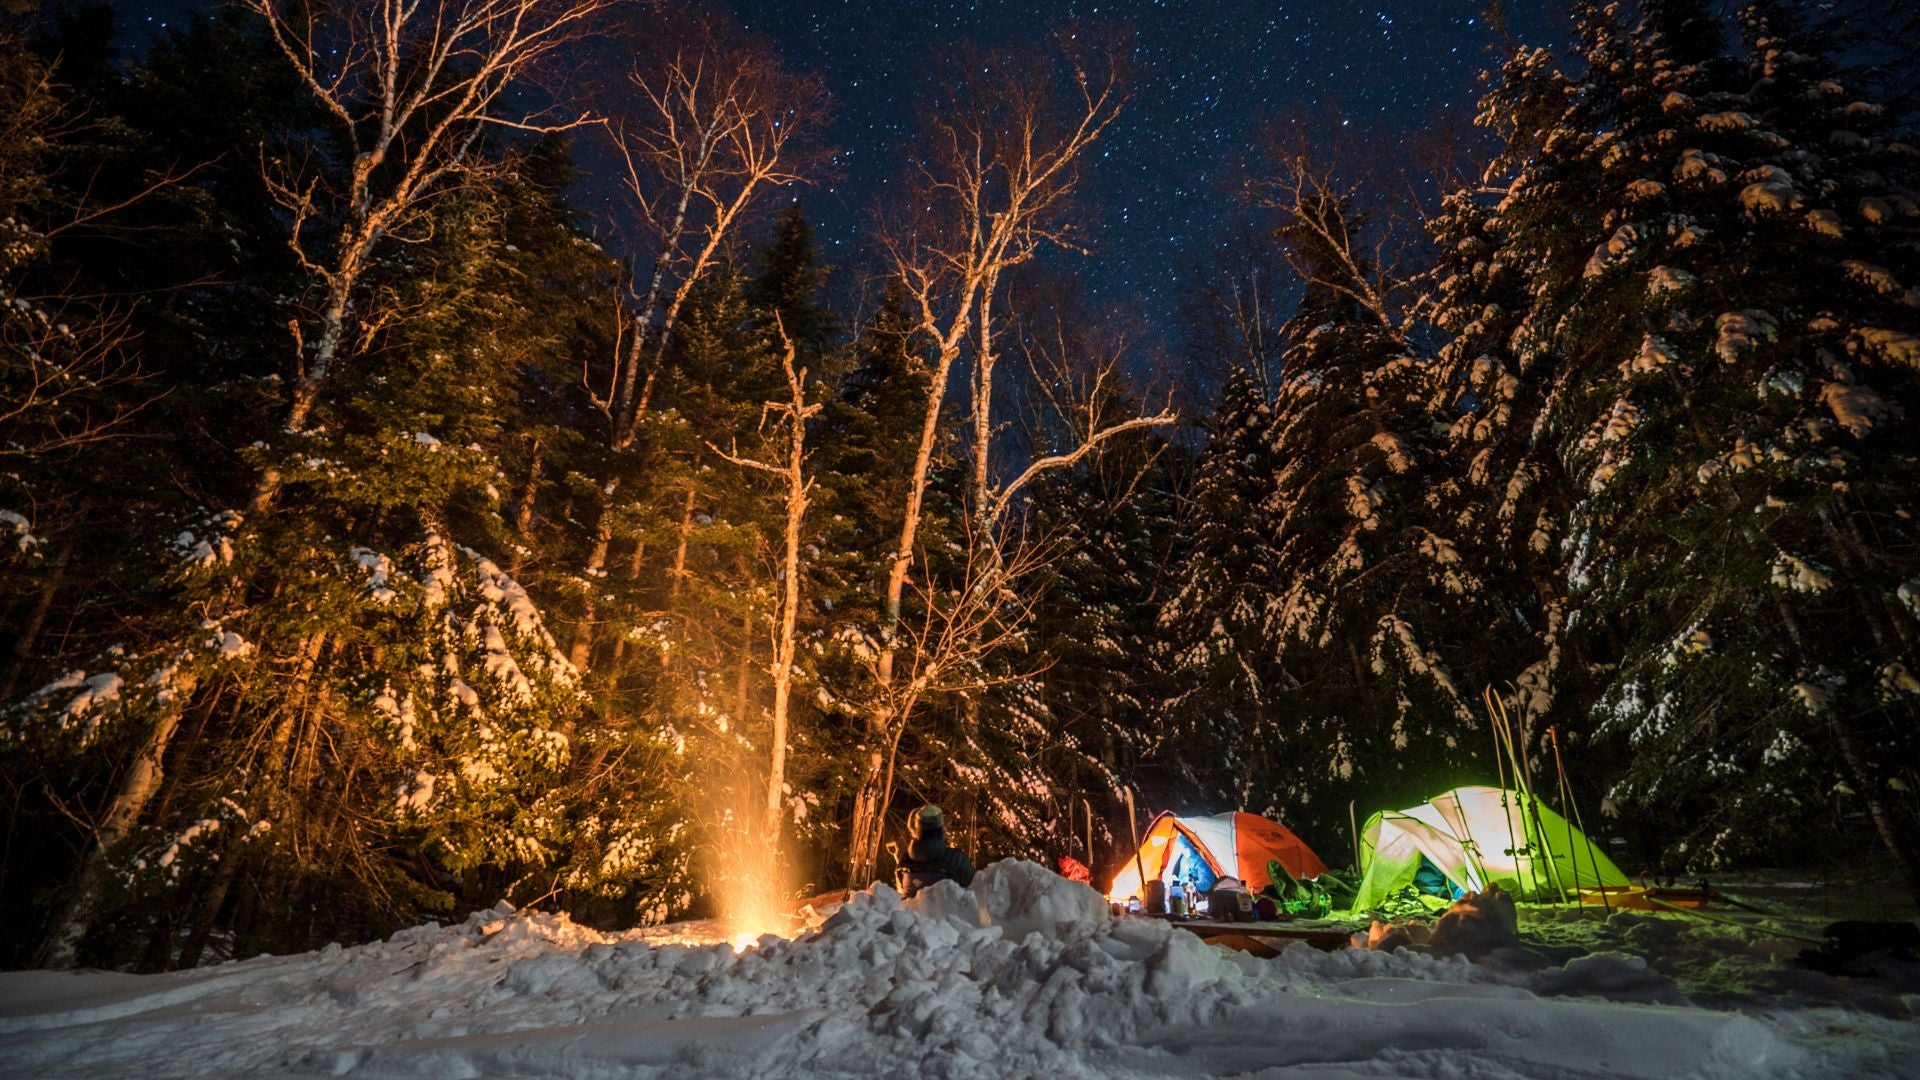 Winter camping with campfire